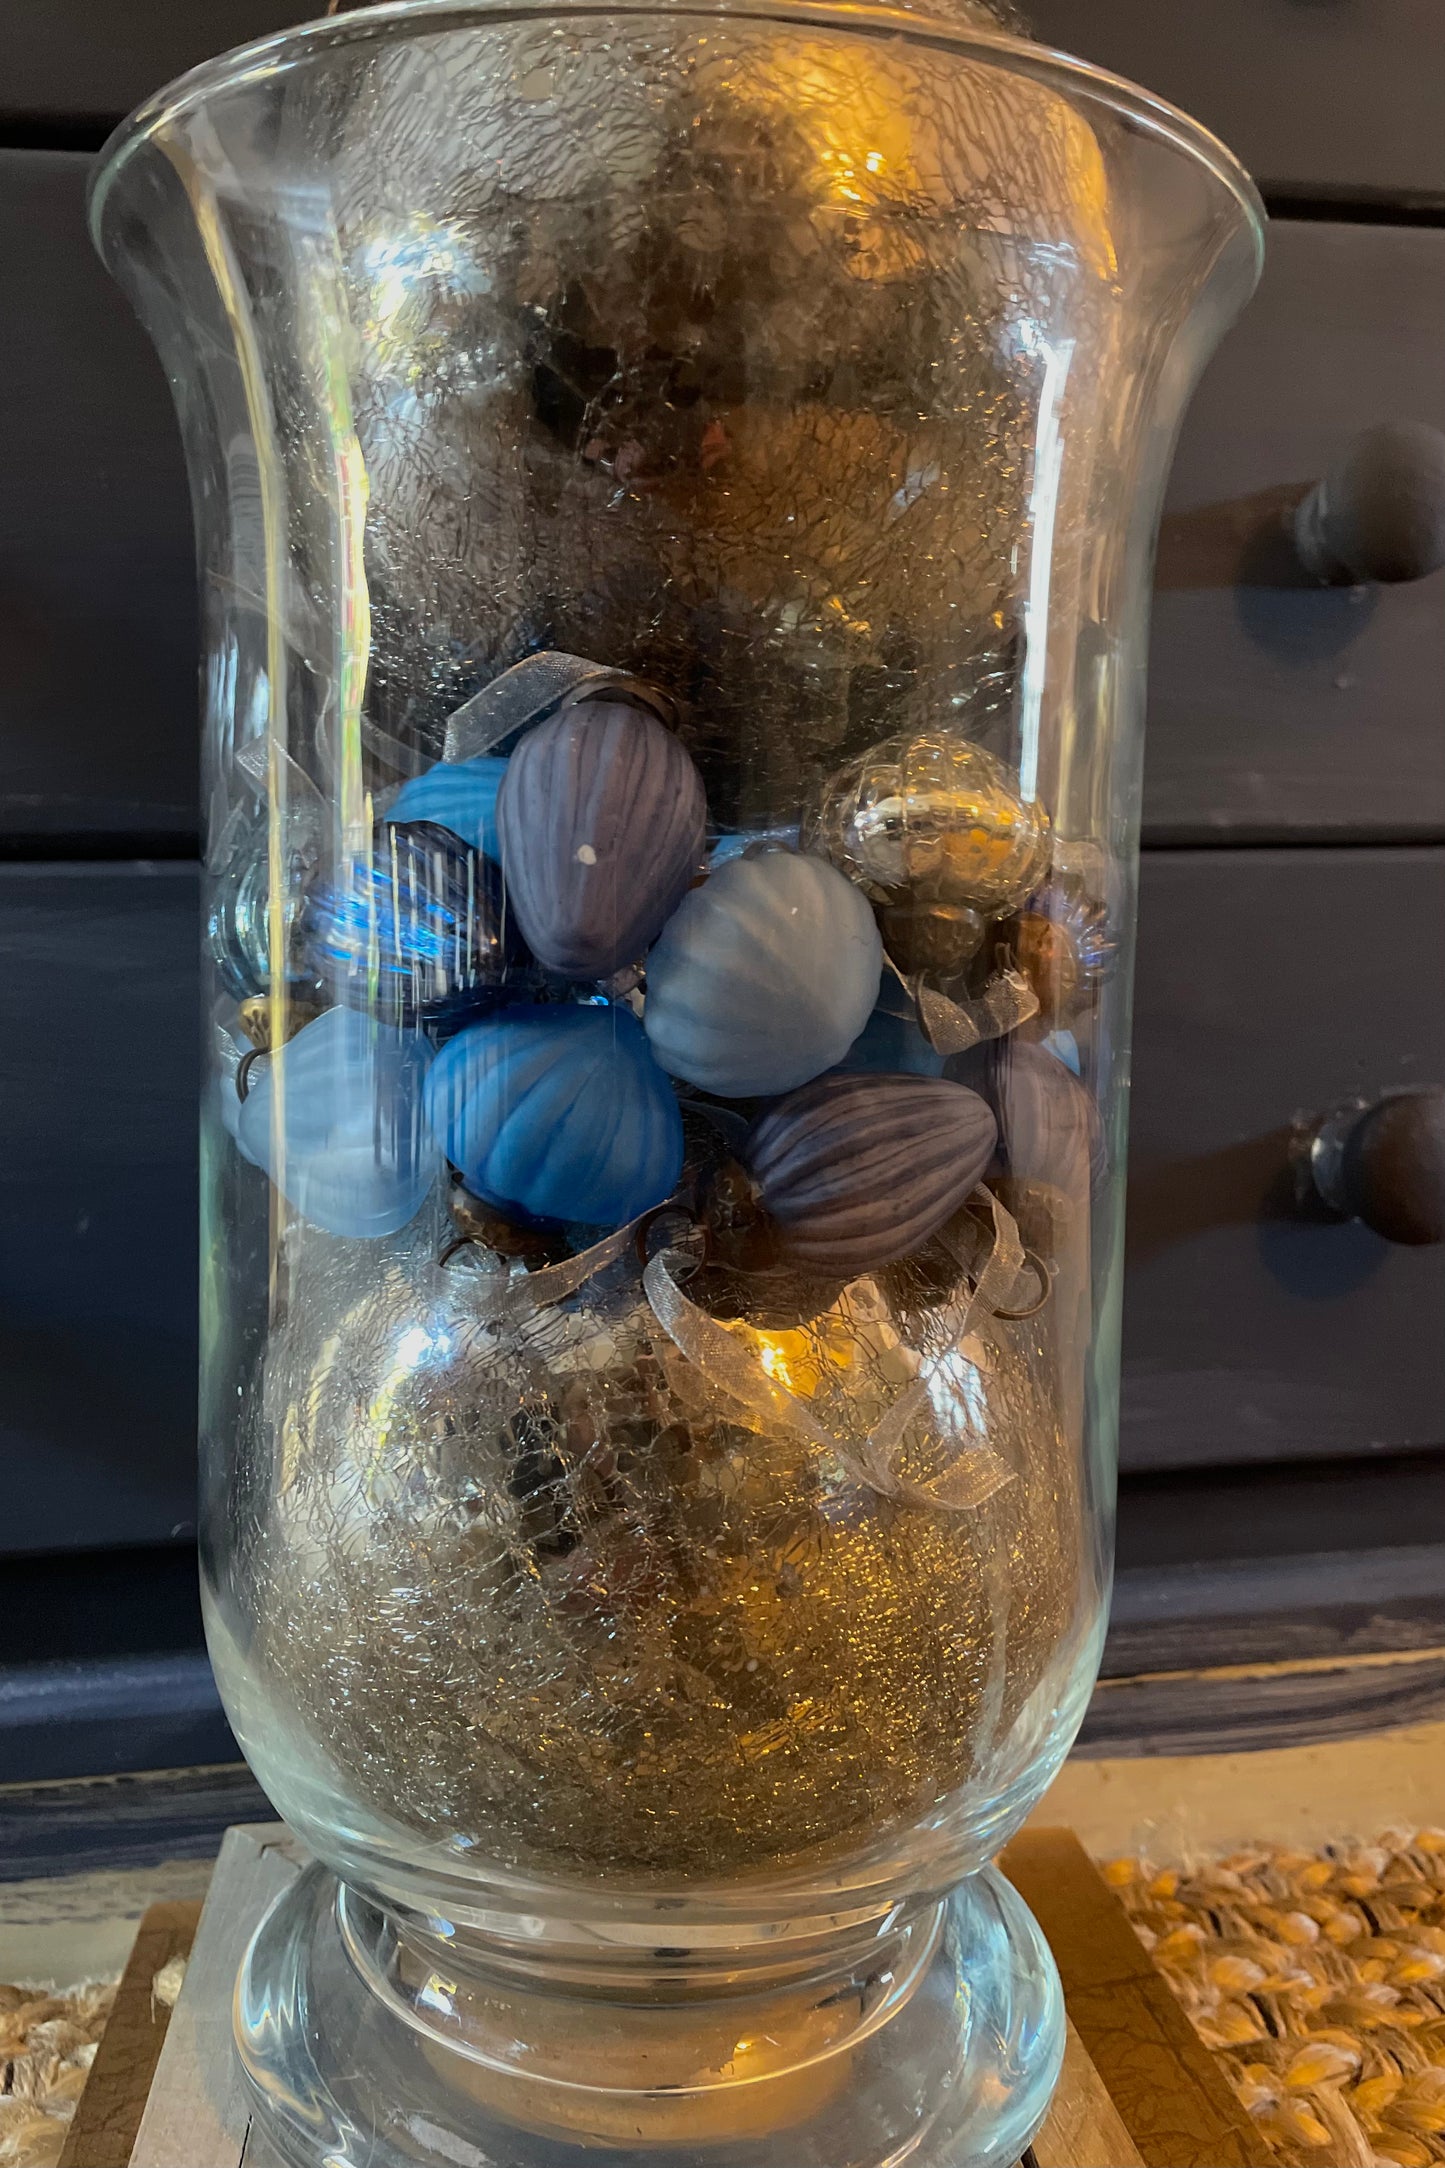 Pick & Mix - Small Glass Baubles - Blues